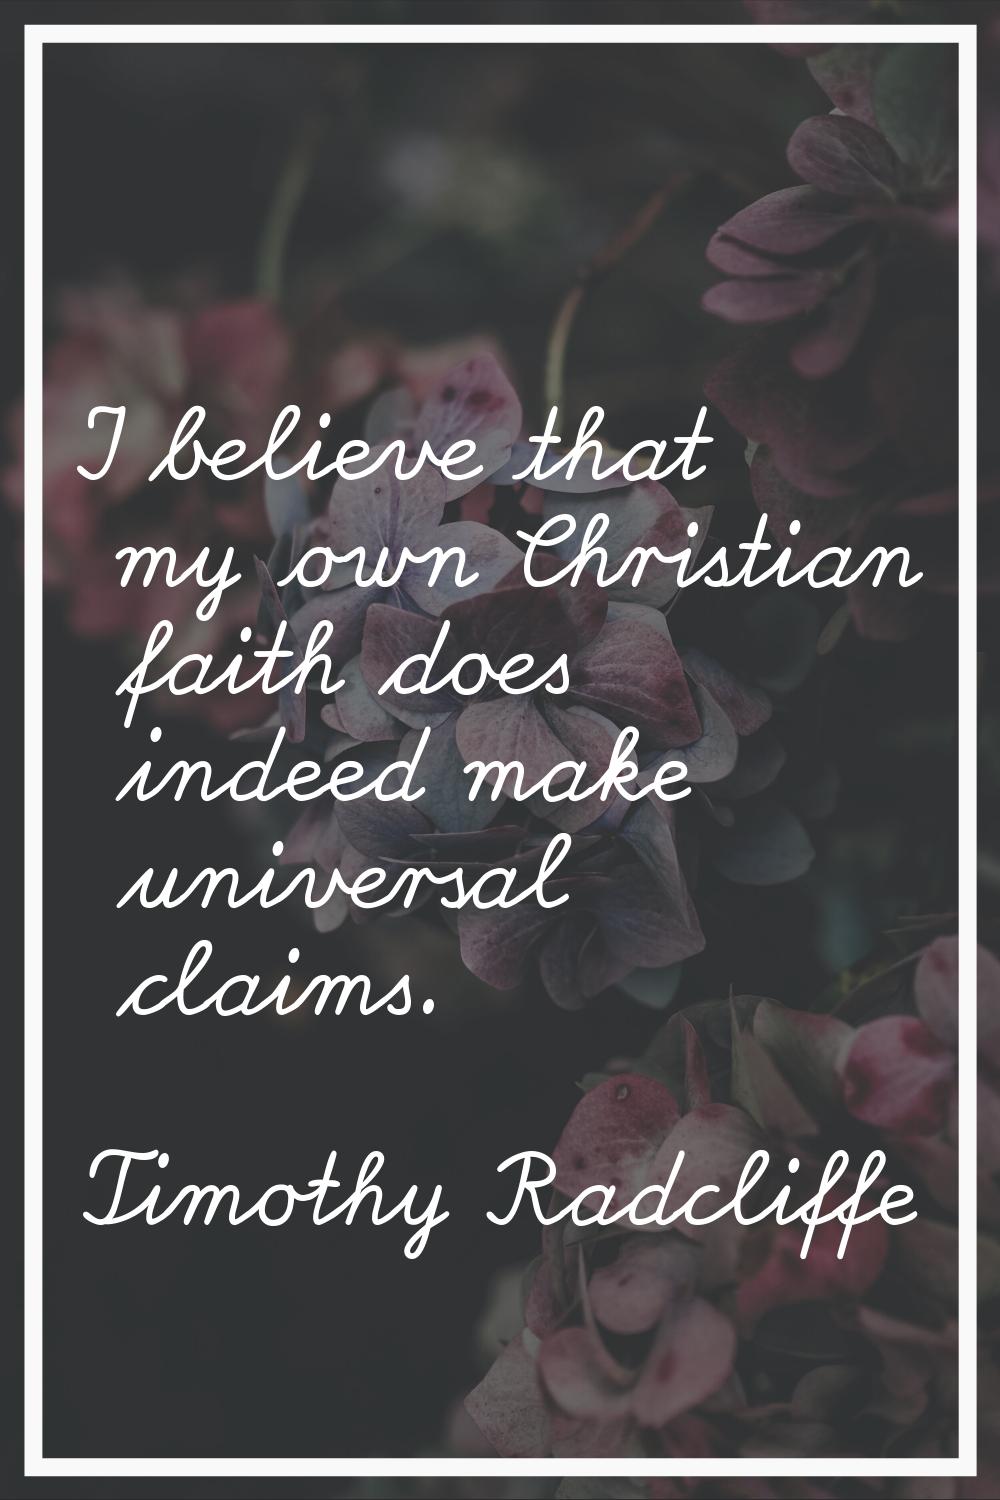 I believe that my own Christian faith does indeed make universal claims.